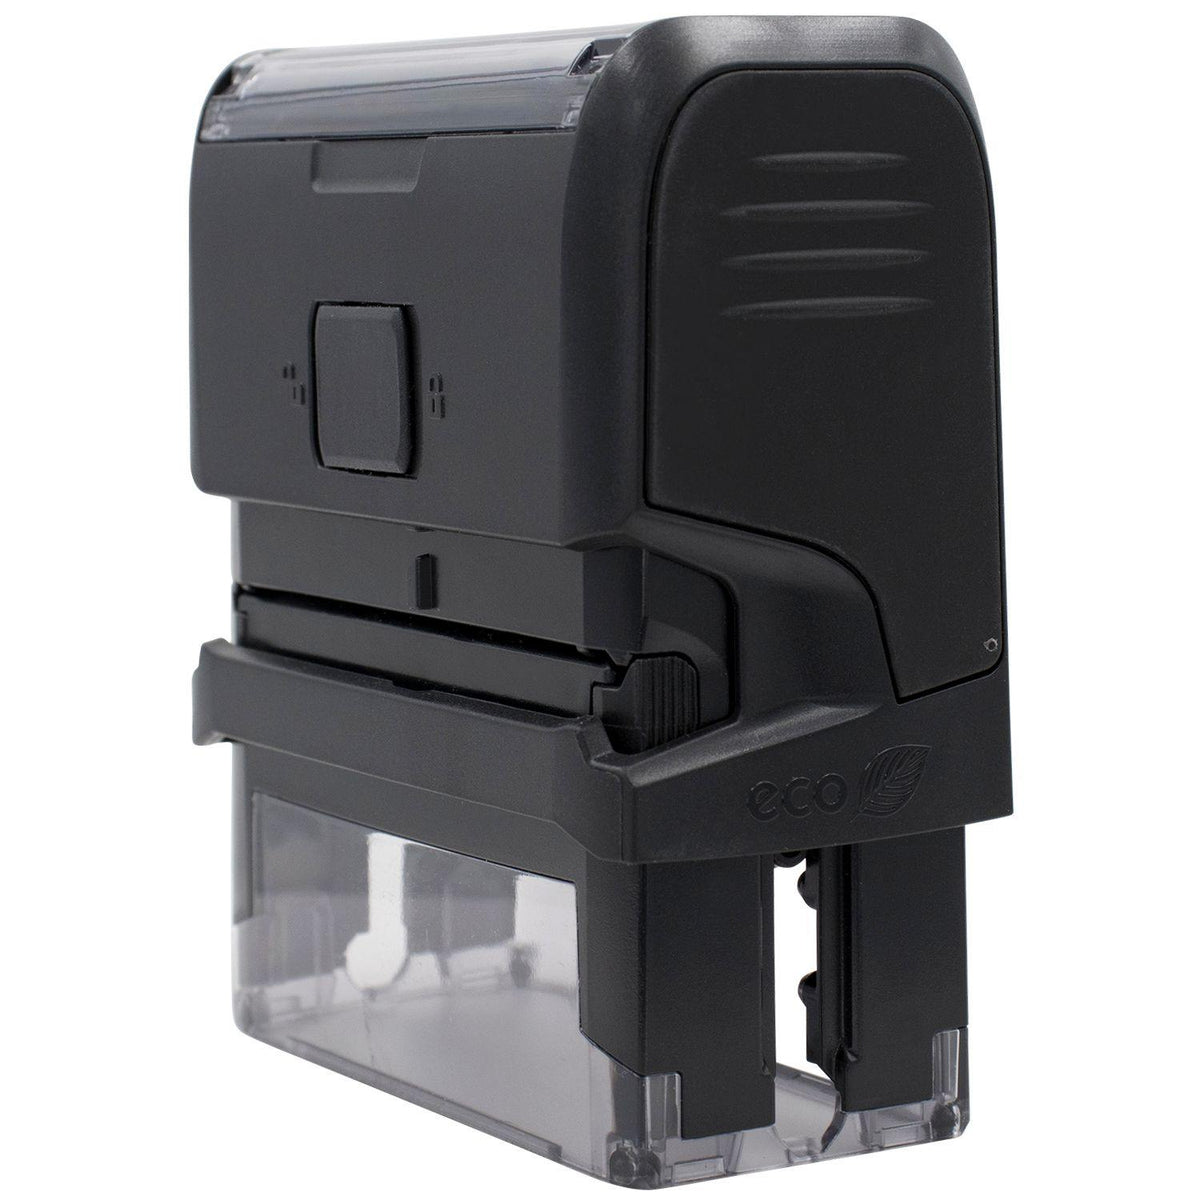 Large Self Inking Pto Stamp - Engineer Seal Stamps - Brand_Trodat, Impression Size_Large, Stamp Type_Self-Inking Stamp, Type of Use_Medical Office